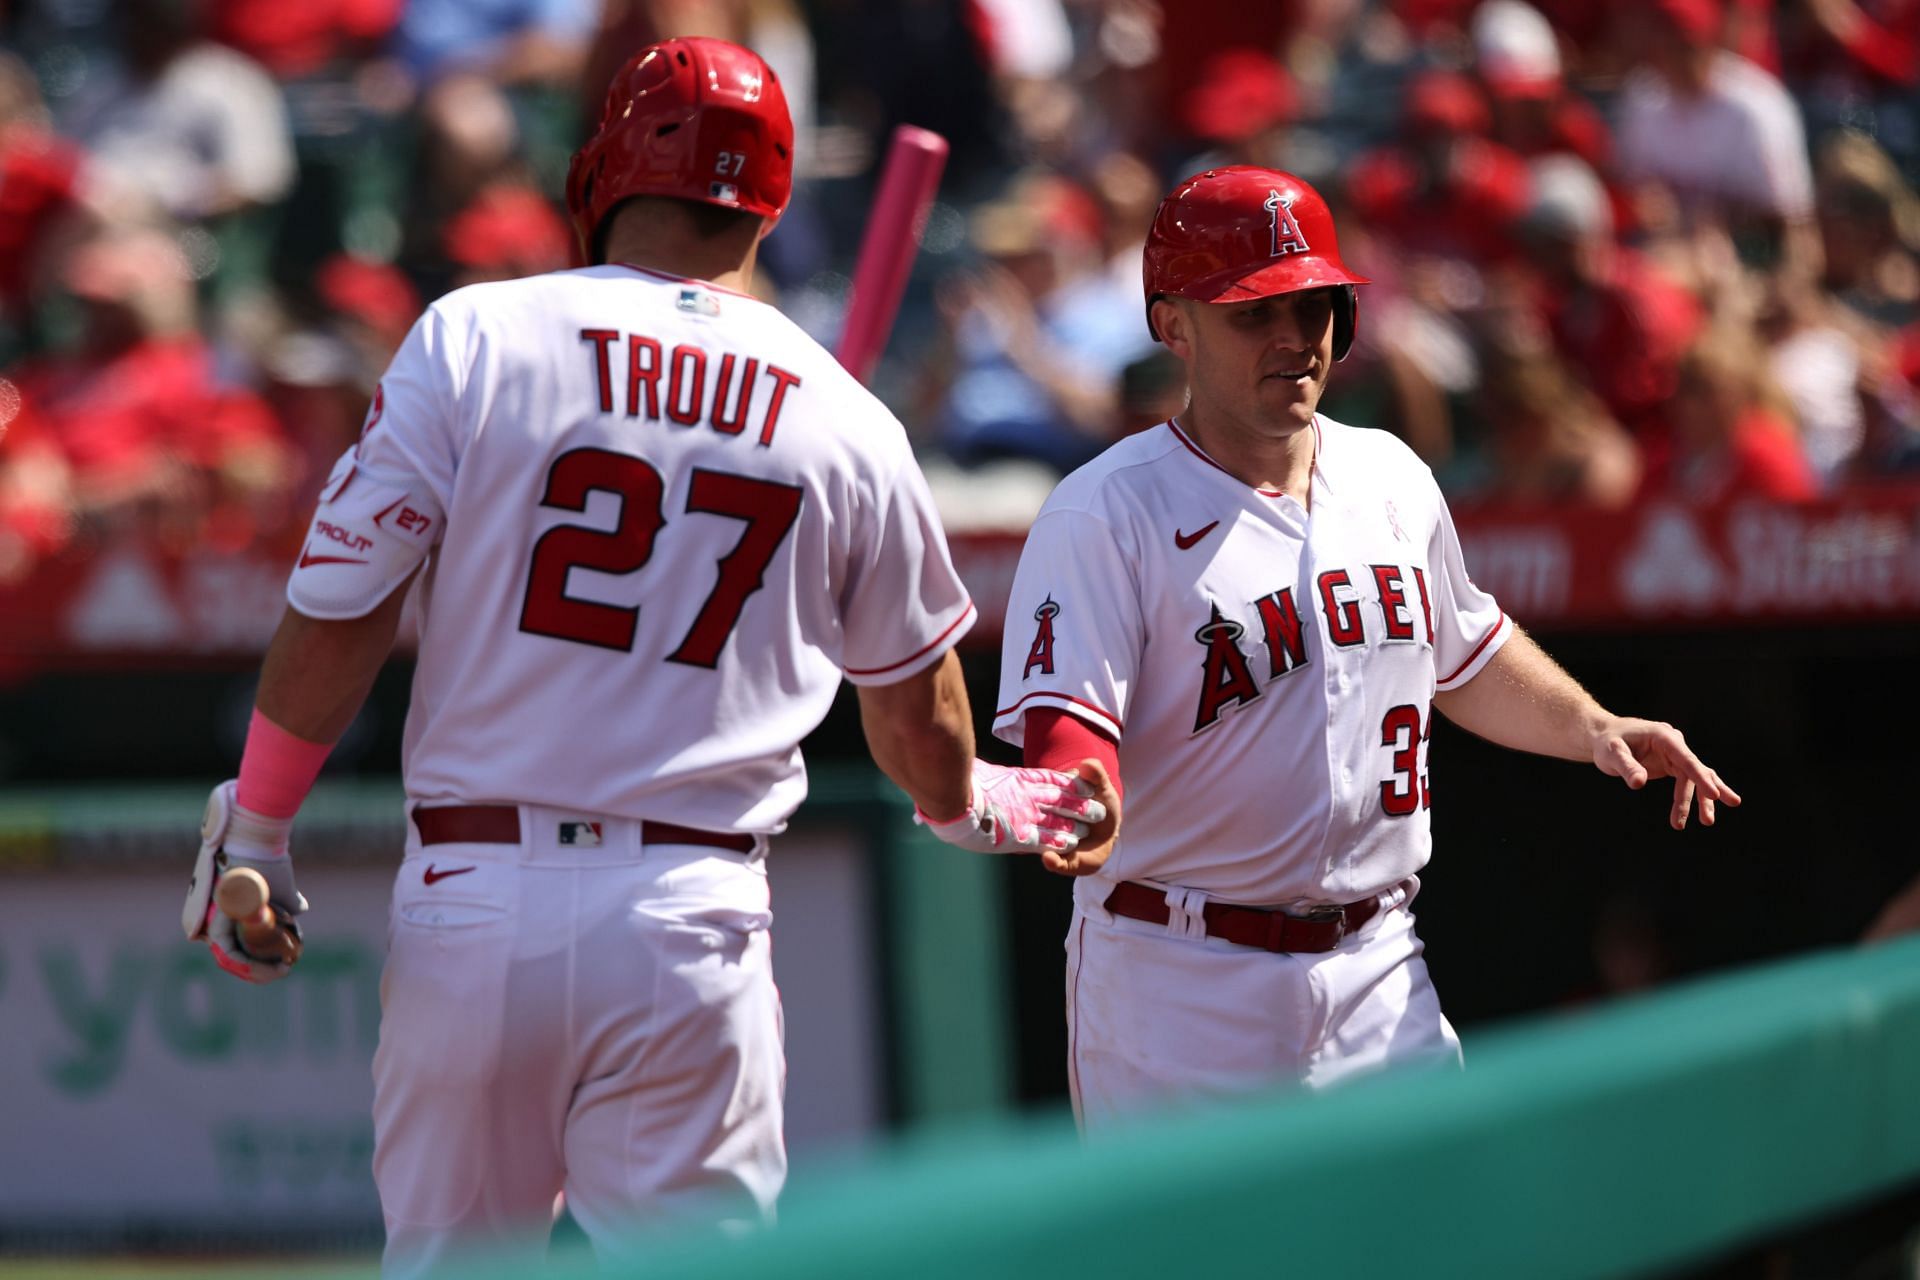 Angels outfielder Mike Trout made history with his 161st career home run at Angels Stadium on Monday.